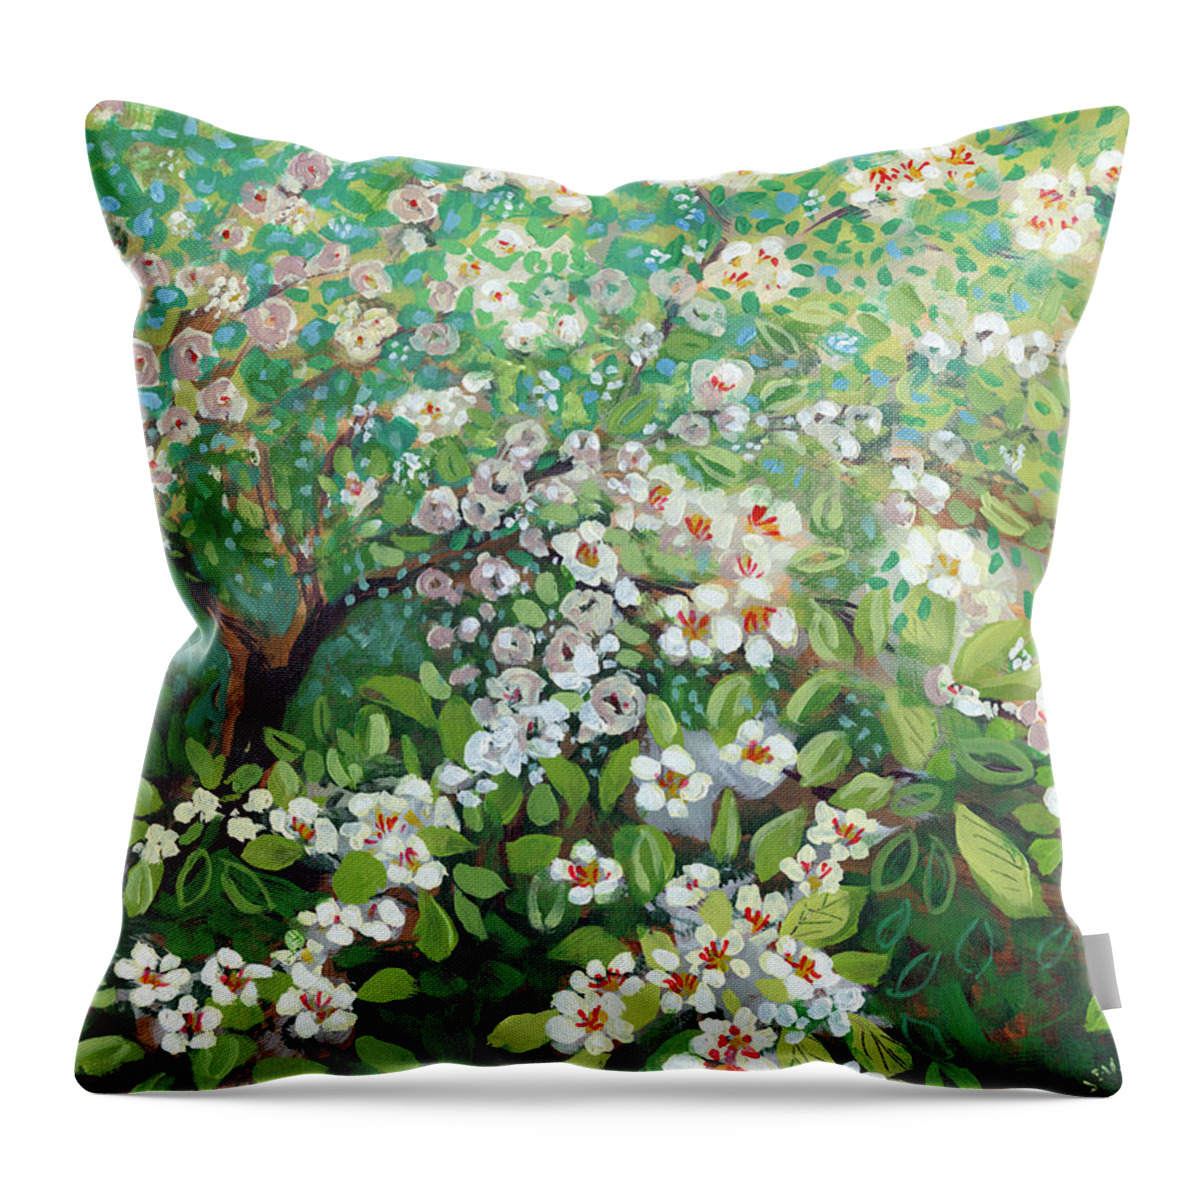 Landscape Throw Pillow featuring the painting Cascading by Jennifer Lommers